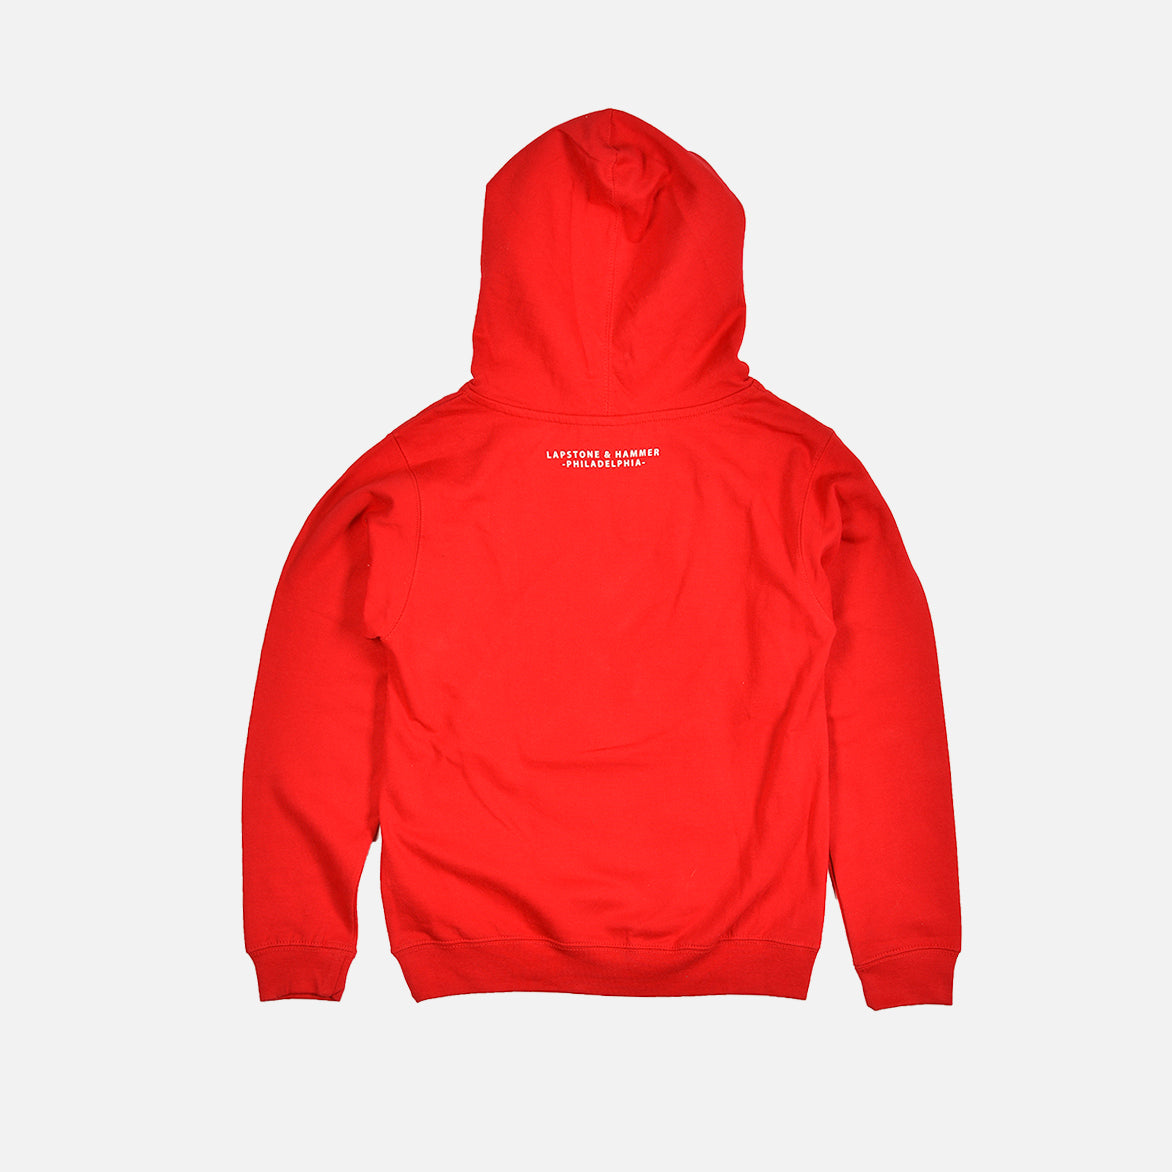 DIVINE YOUTH HOODIE - RED | lapstoneandhammer.com